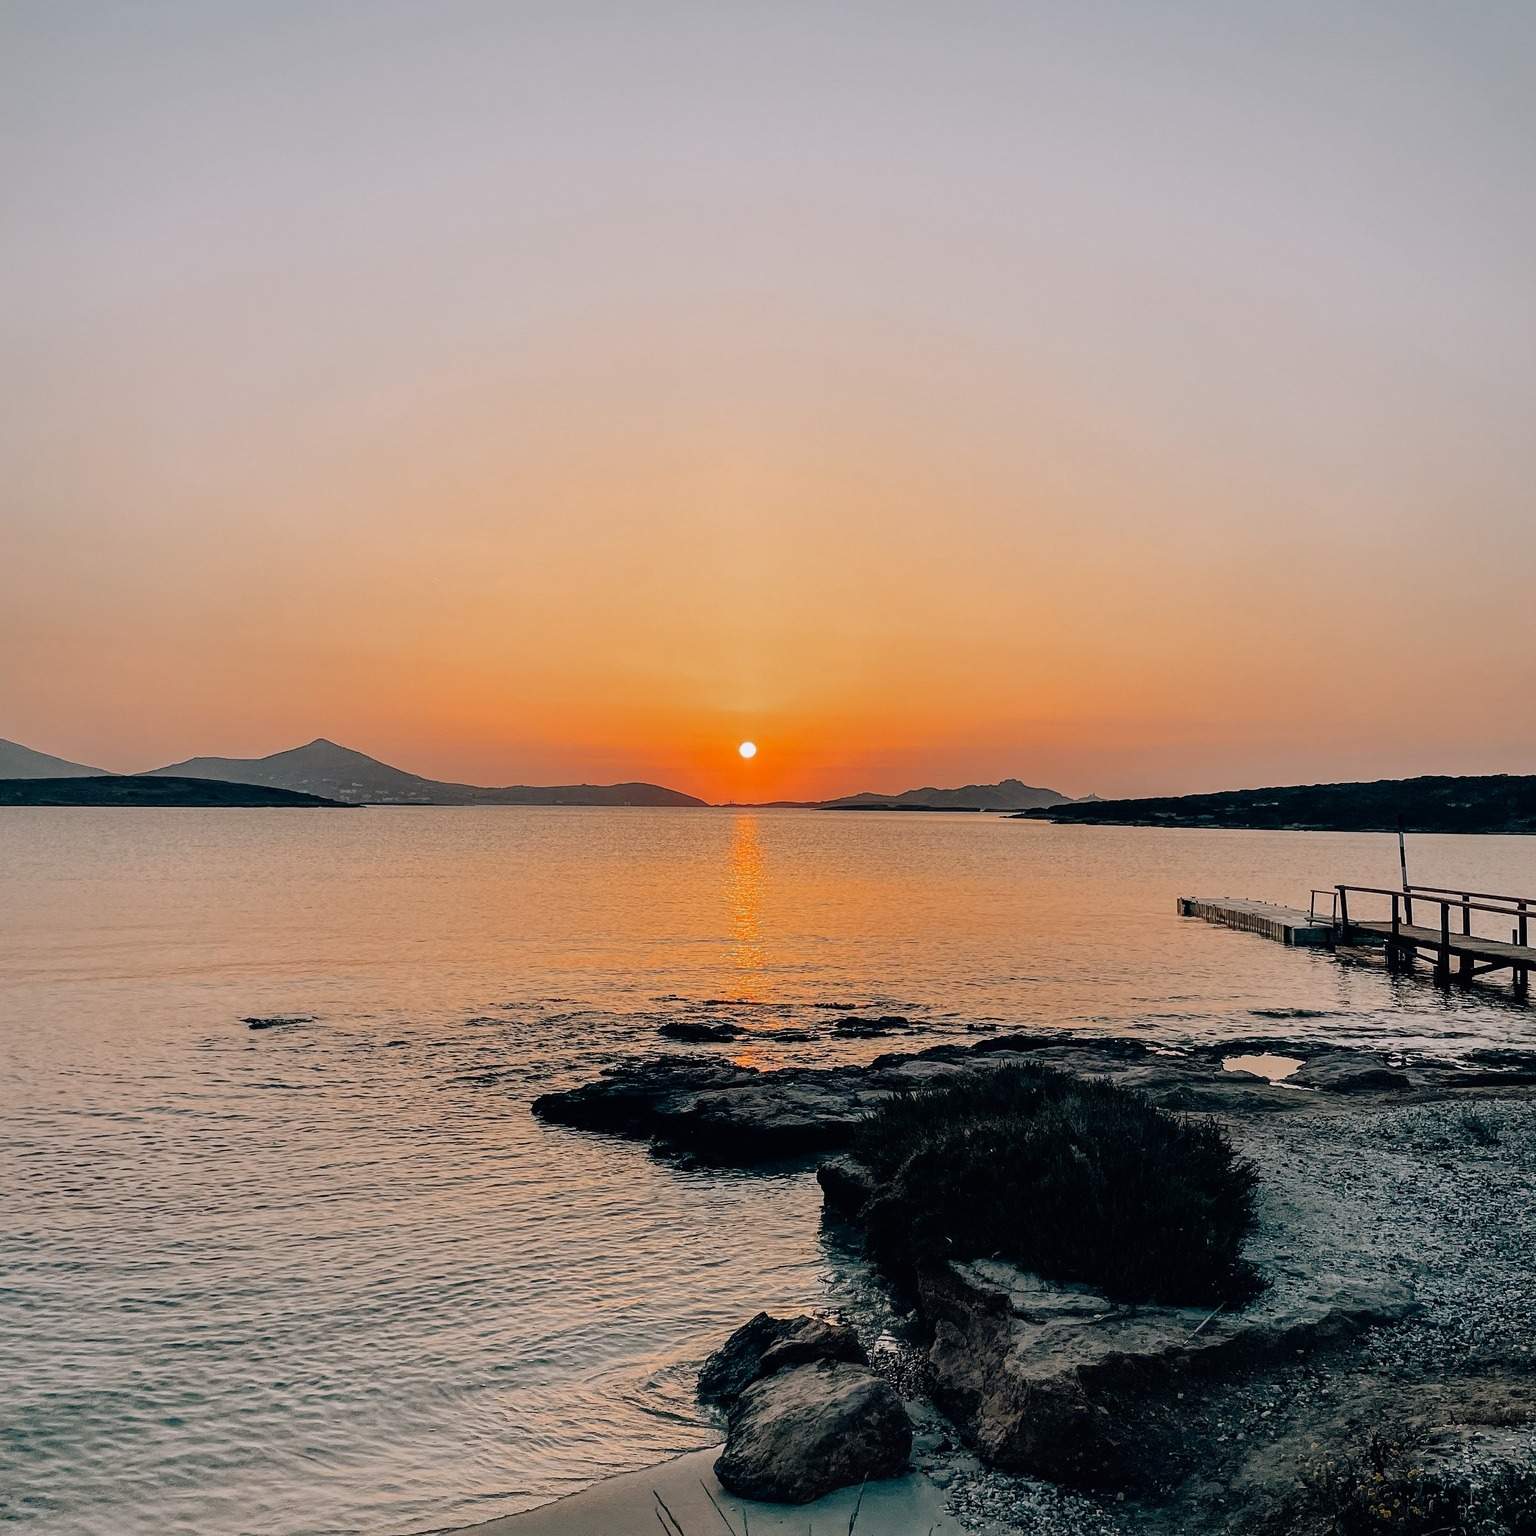 Witness nature's breathtaking finale as the sun bids farewell to the day. The golden hour paints the sky with hues of warmth and wonder, while the sea mirrors the sky's enchanting beauty. 🧡
.
#amalgamhomes #artofcomfort #greece #visitgreece #greekislands #cyclades #greekislands #paros #naxos #mykonos #tinos #ampelas #kastraki #triantaros #travel #wanderlust #greeksummer #discovergreece